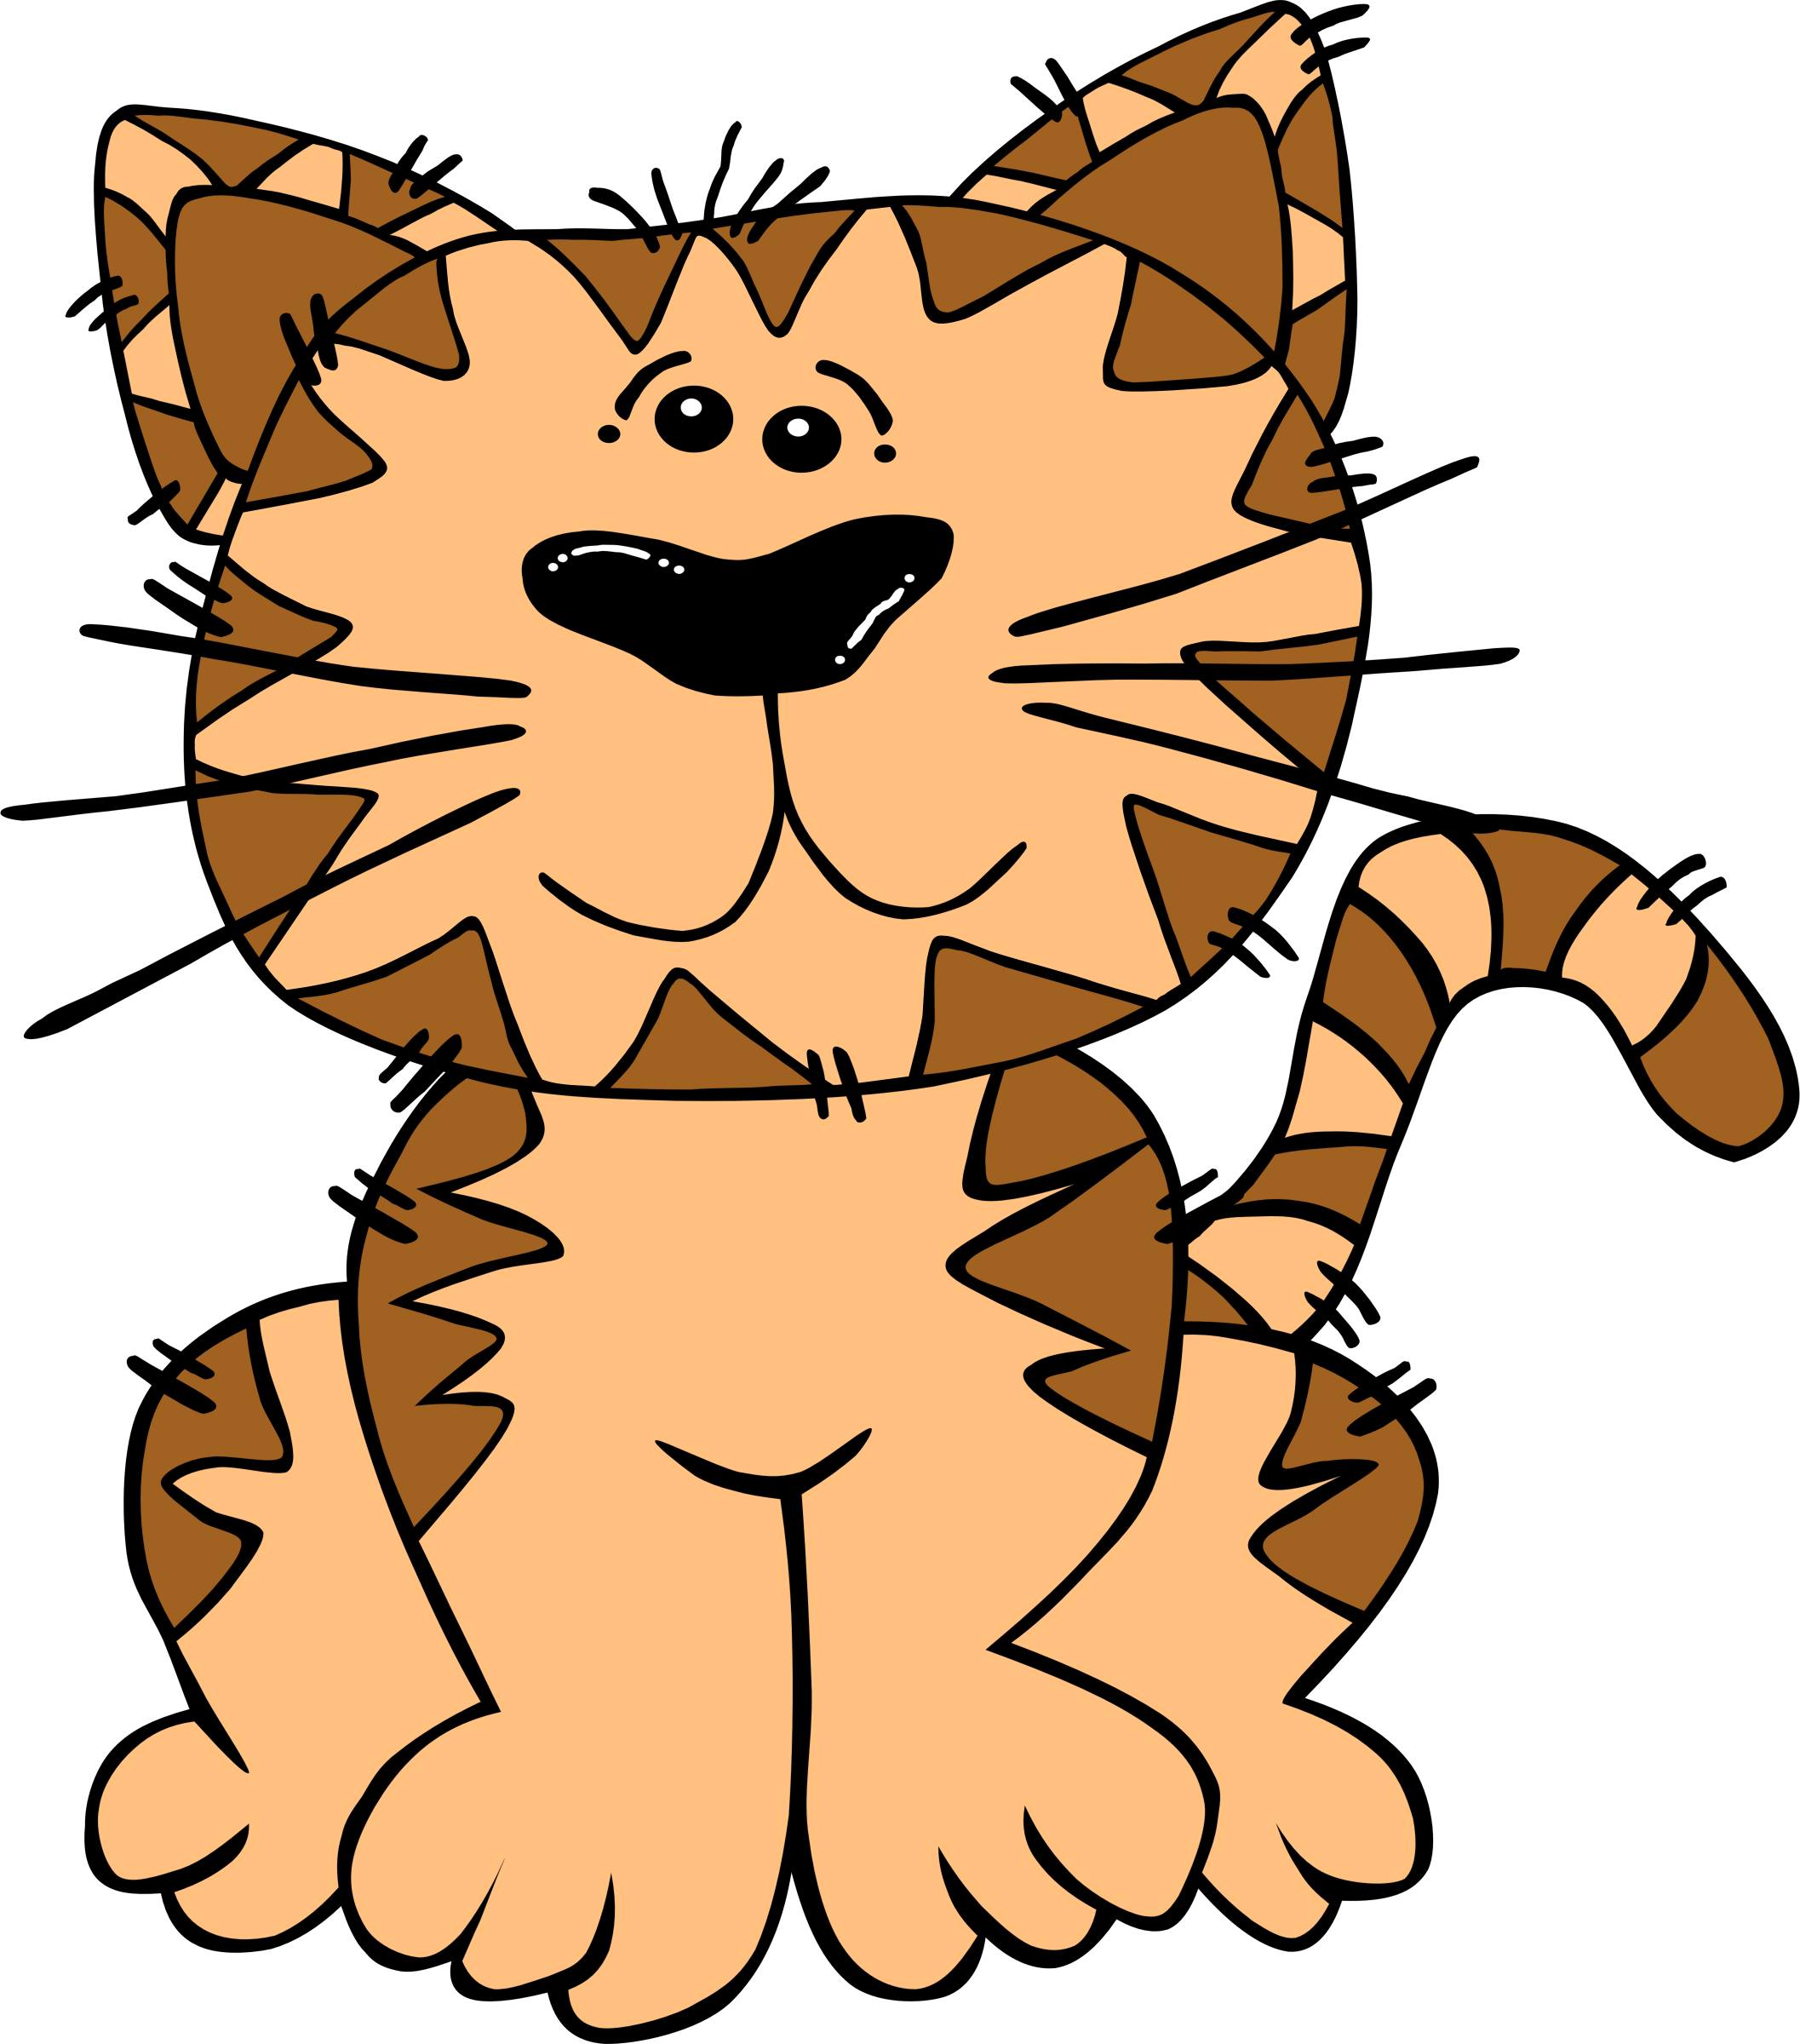 Pictures Of Cartoon Cats Sitting Down - ClipArt Best